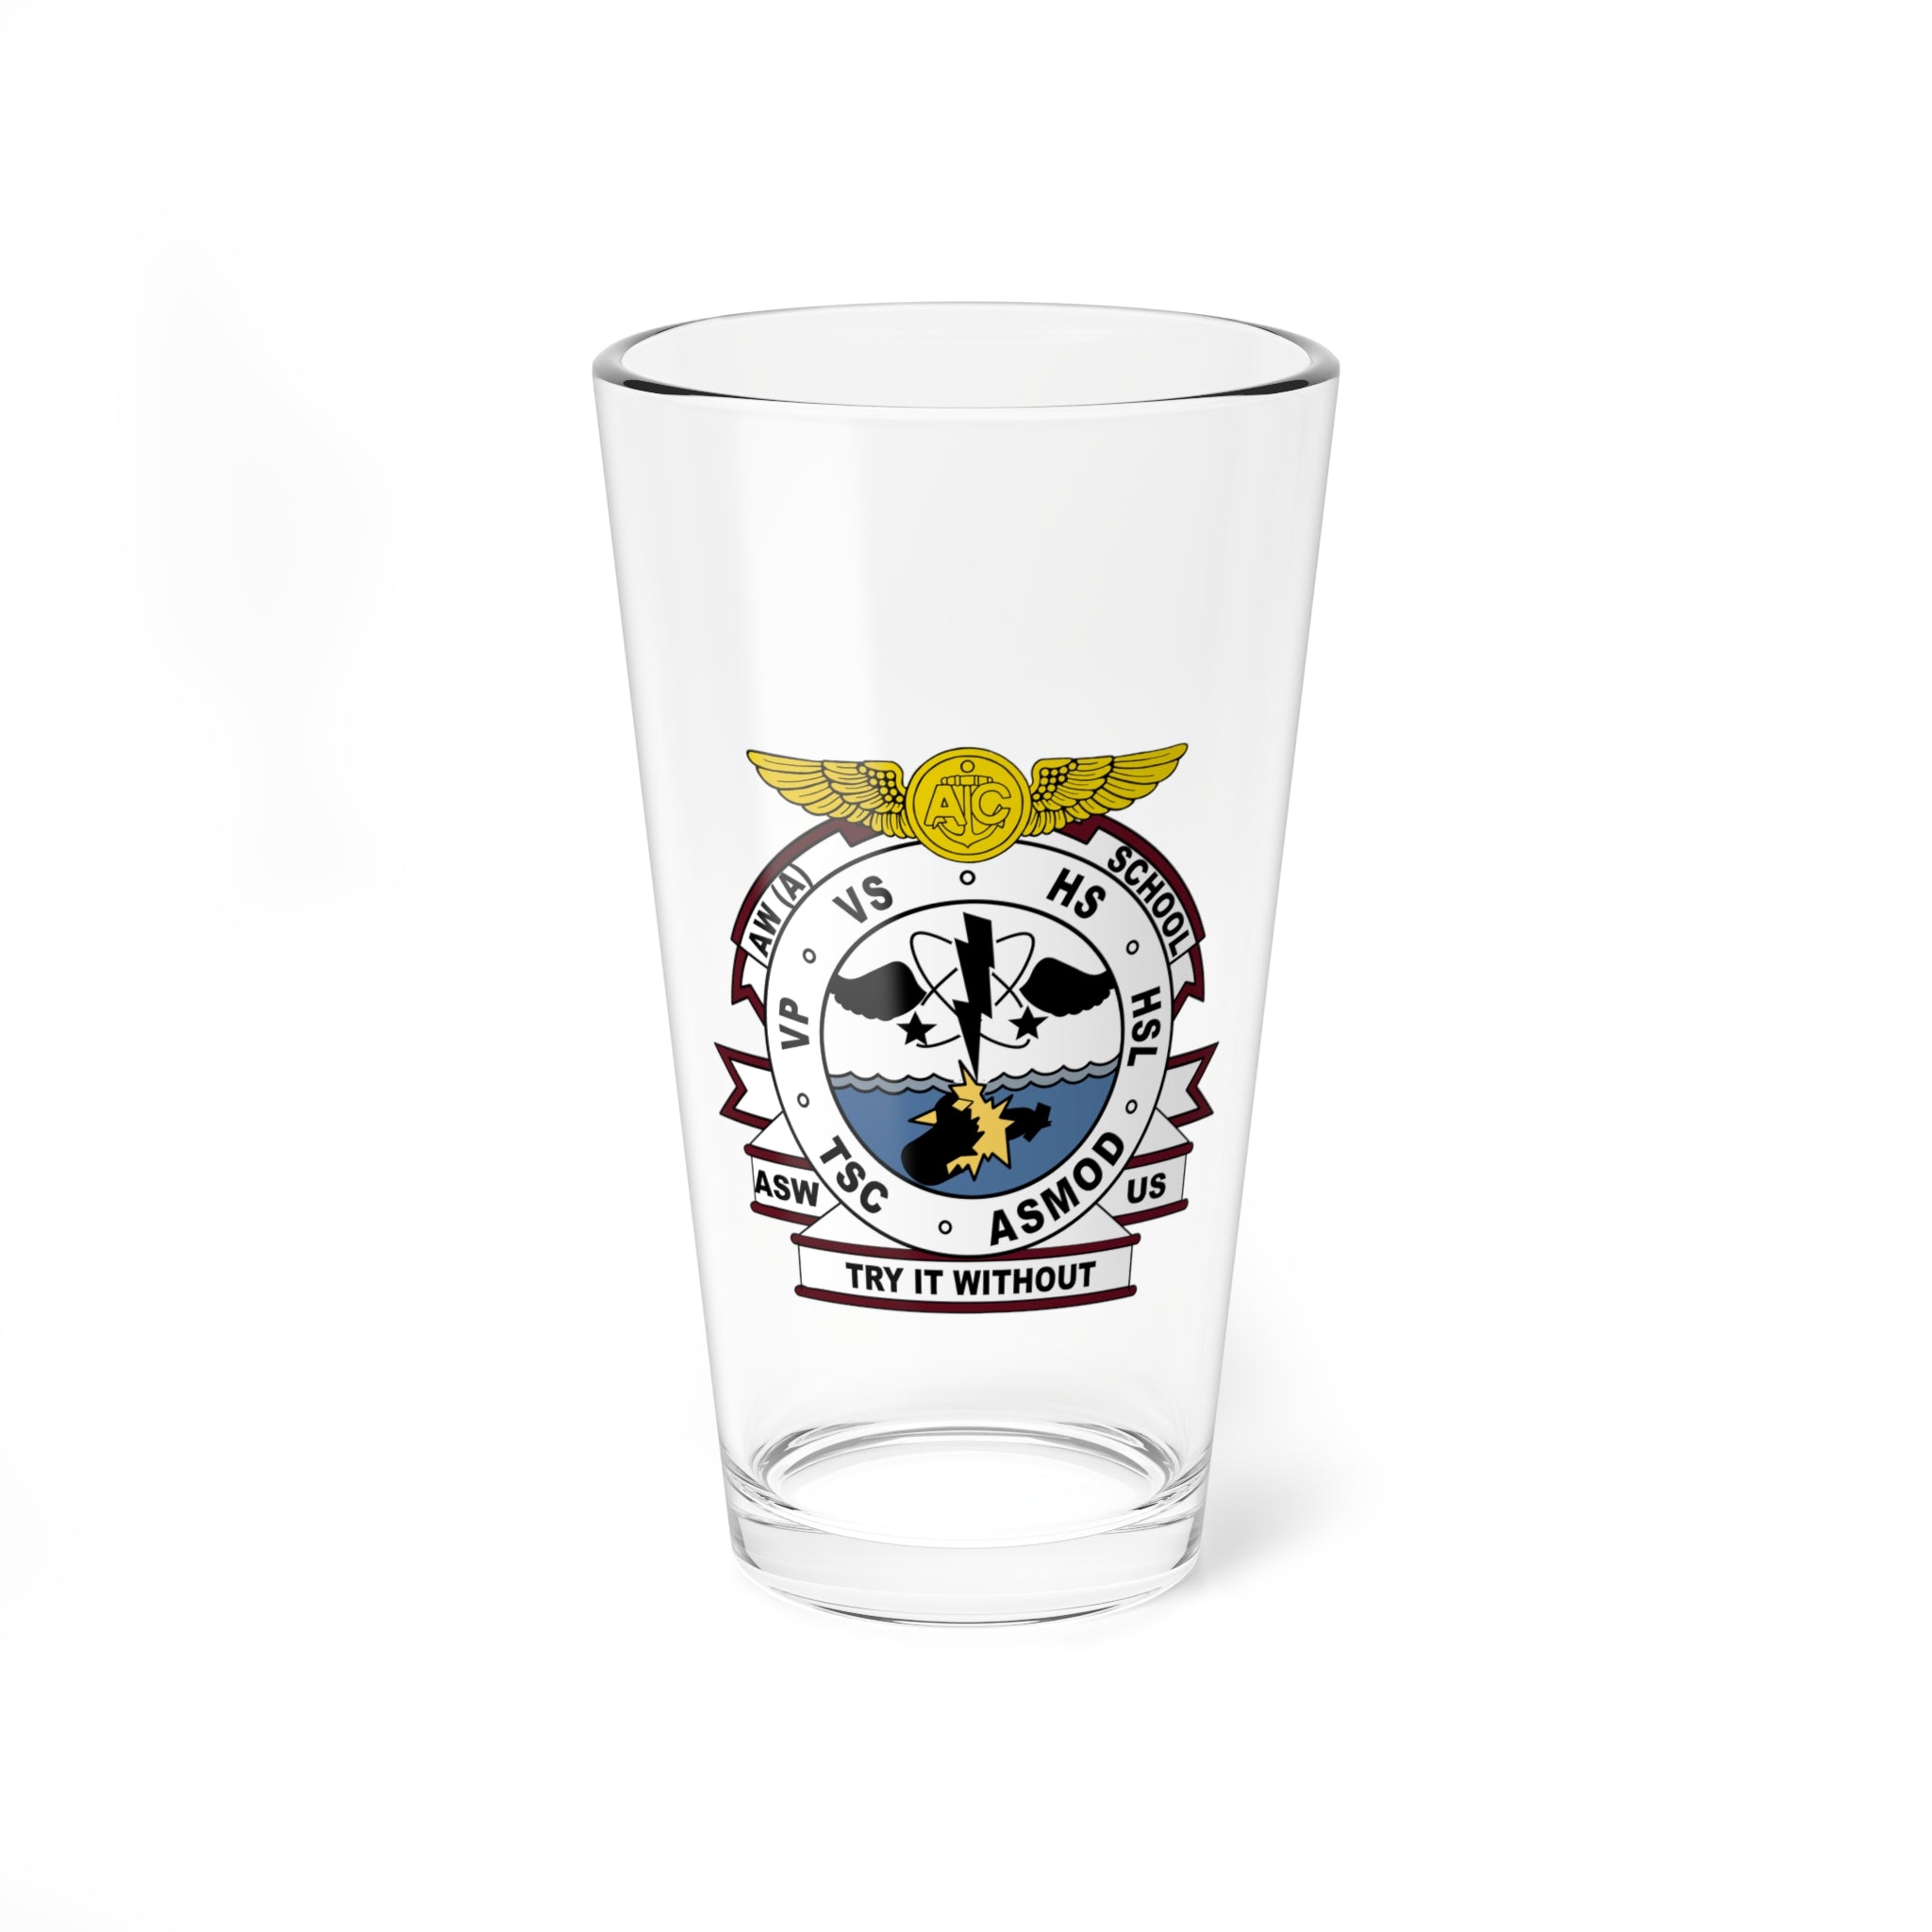 AW(A) School Pint Glass, US Navy Aviation Warfare Systems Operator Advance Training School from late 1990's to early 2000's